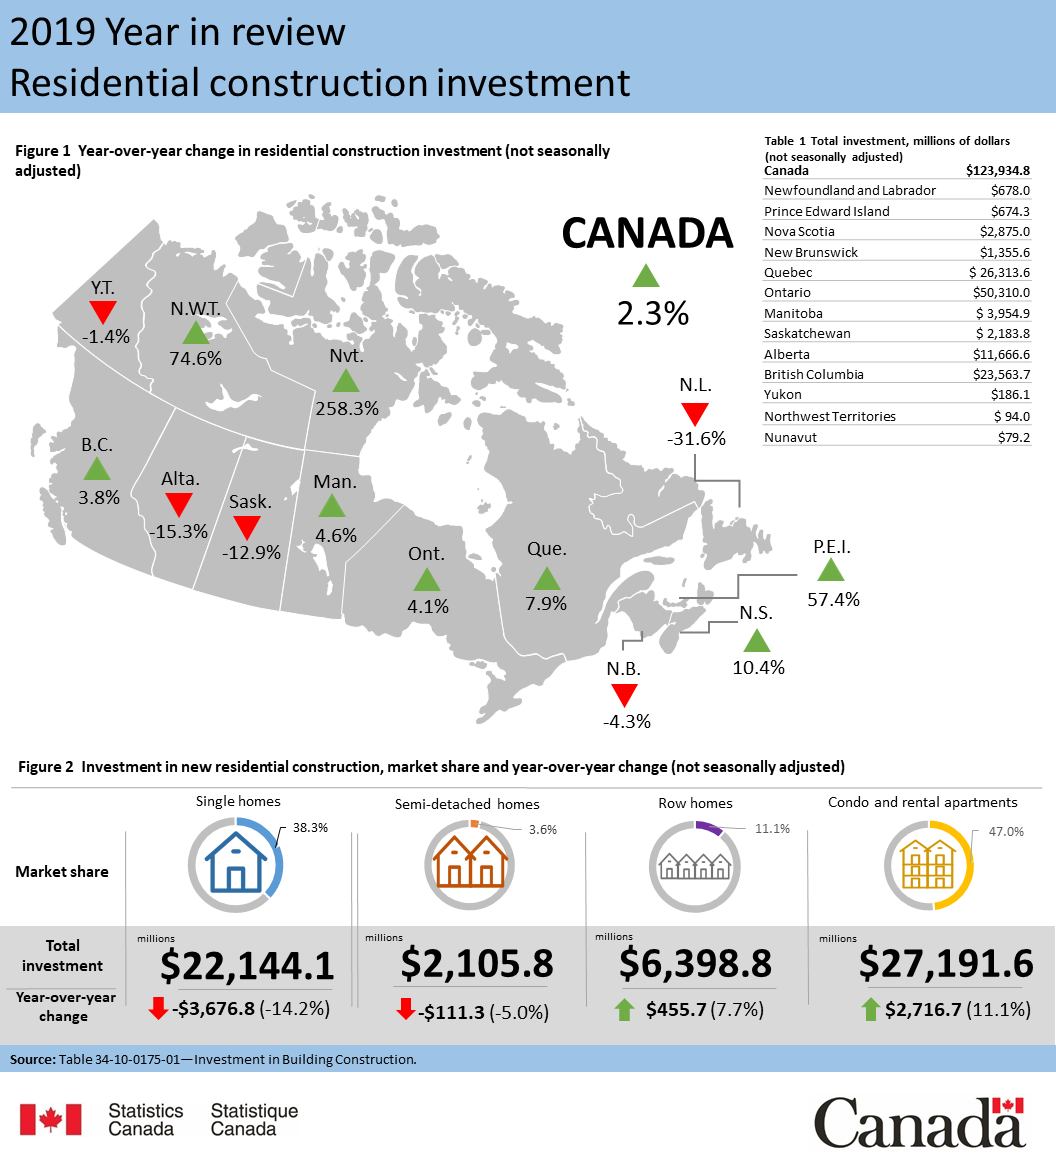 Thumbnail for Infographic 3: Residential construction investment, 2019